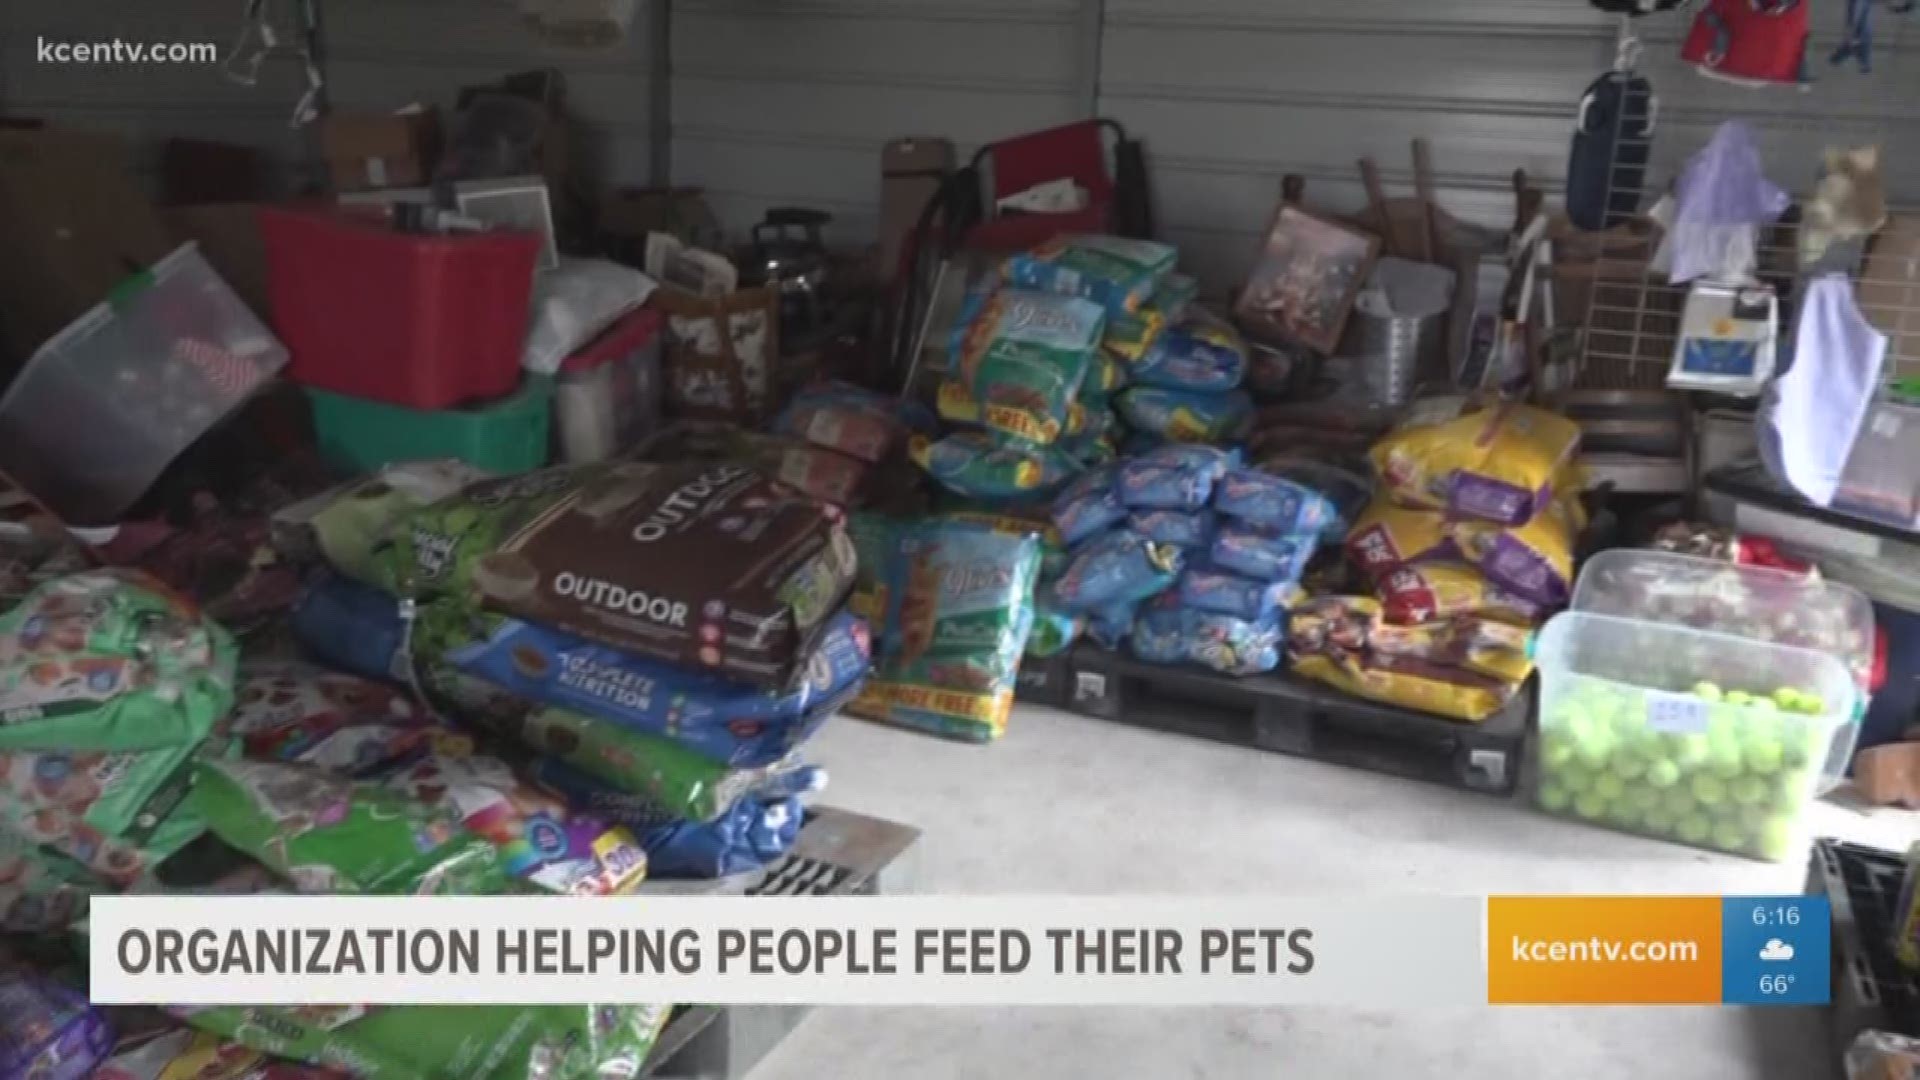 Organization helping families feed their pets.